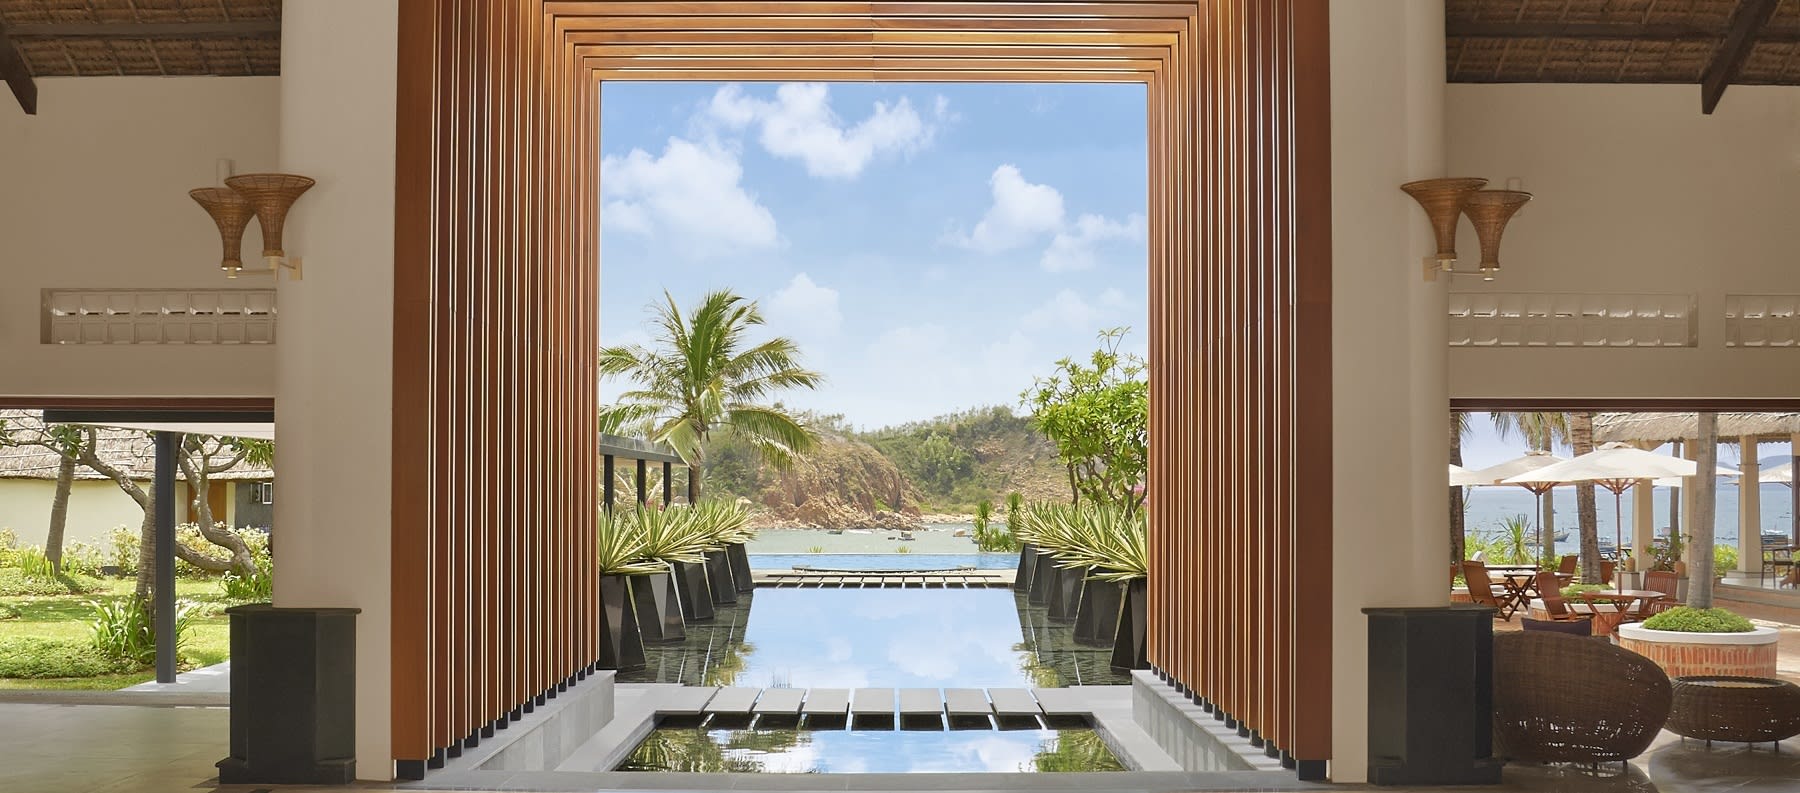 Avani Quy Nhon Resort lobby view with infinity water feature